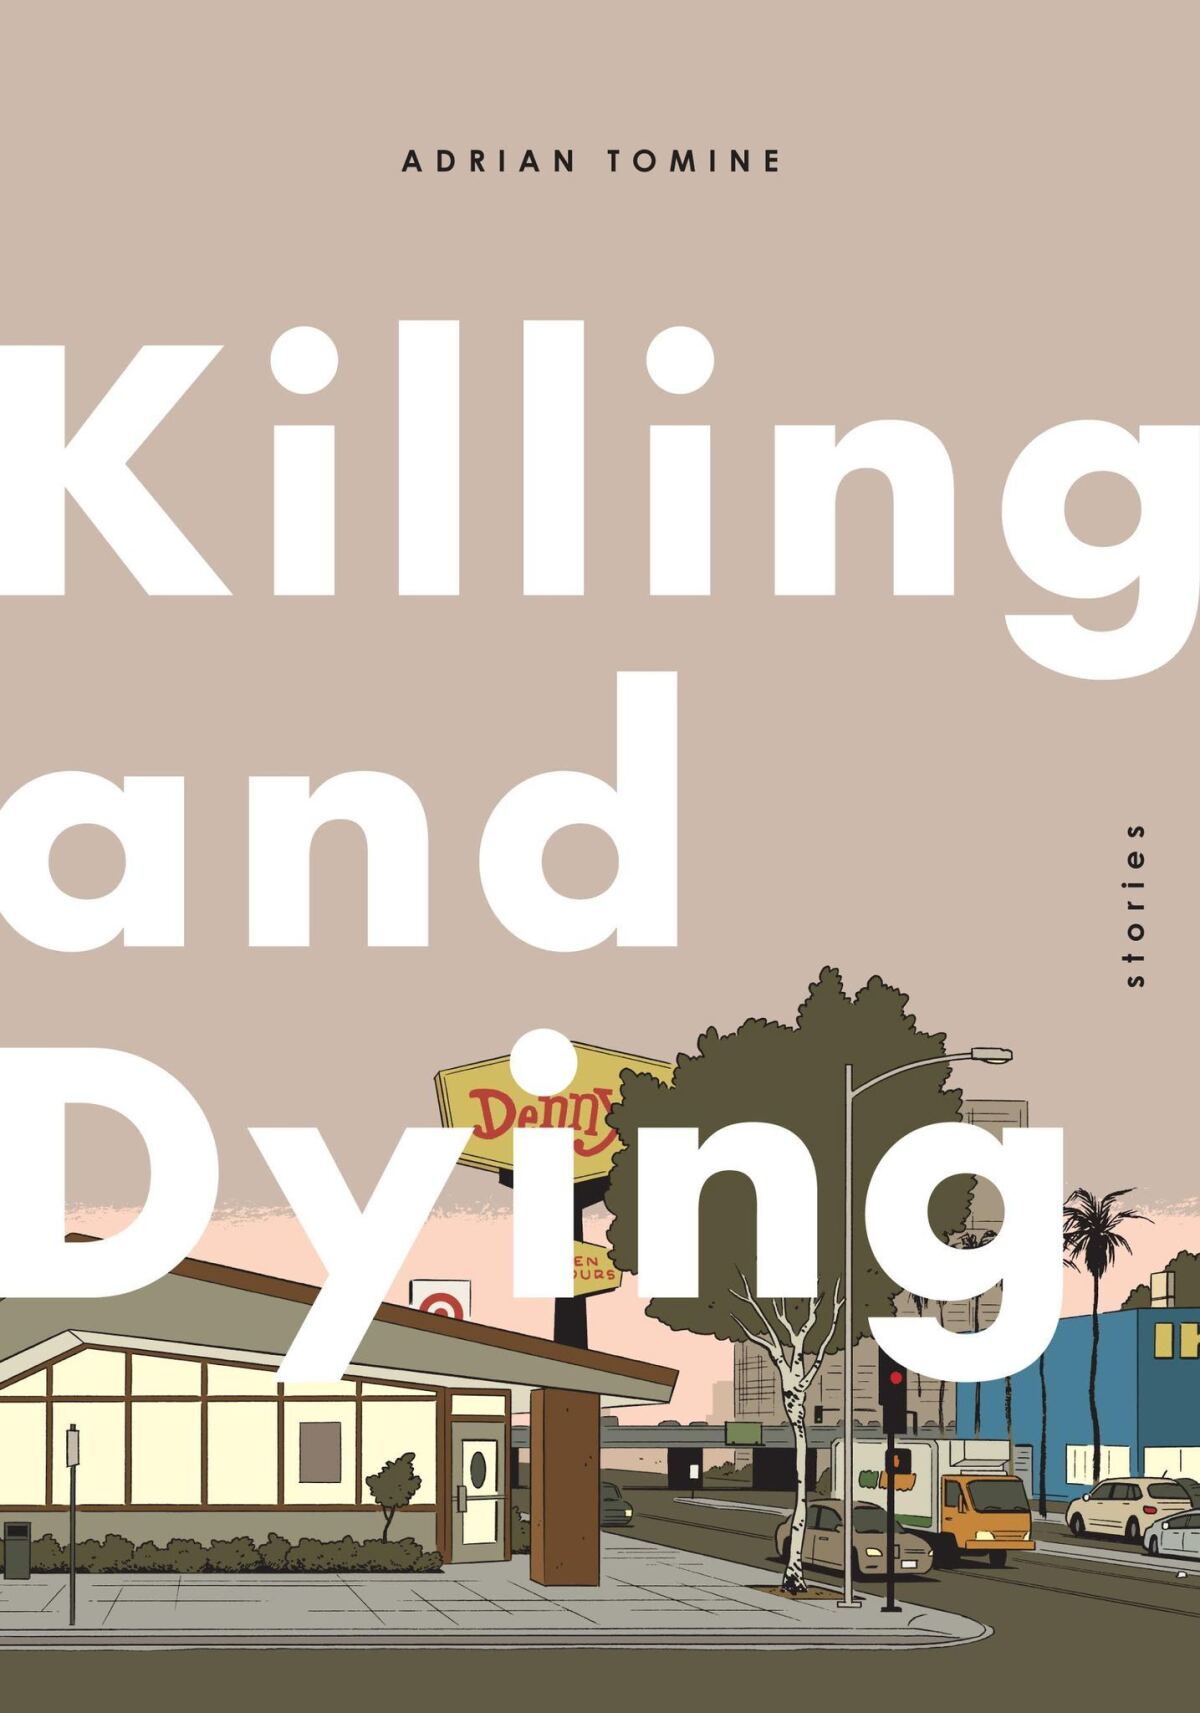 'Killing and Dying' by Adrian Tomine